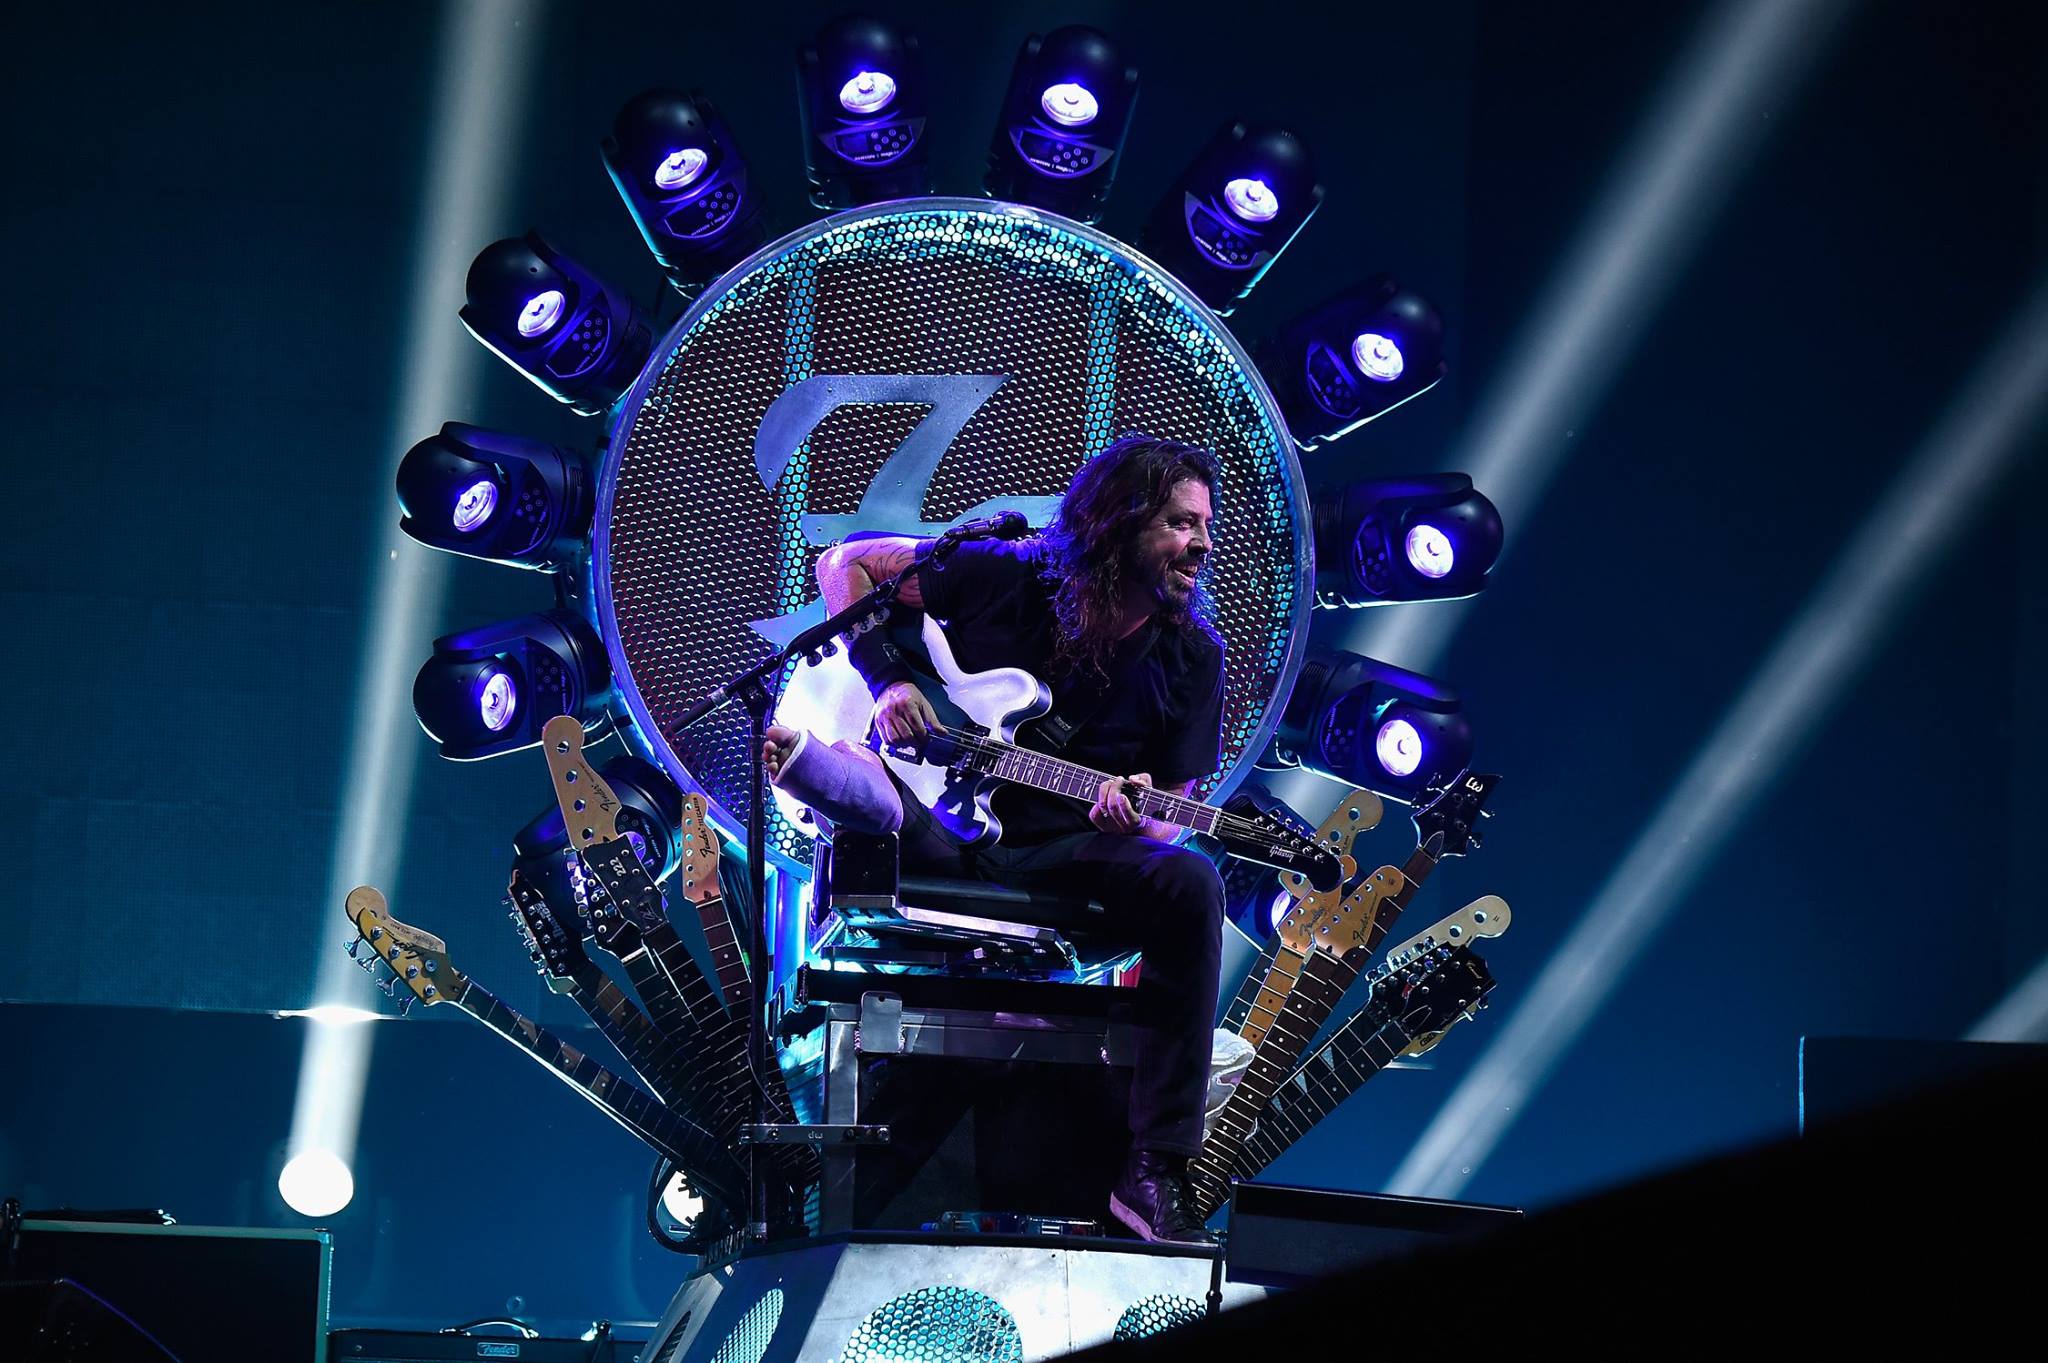 Dave Grohl restages his accident in Sweden